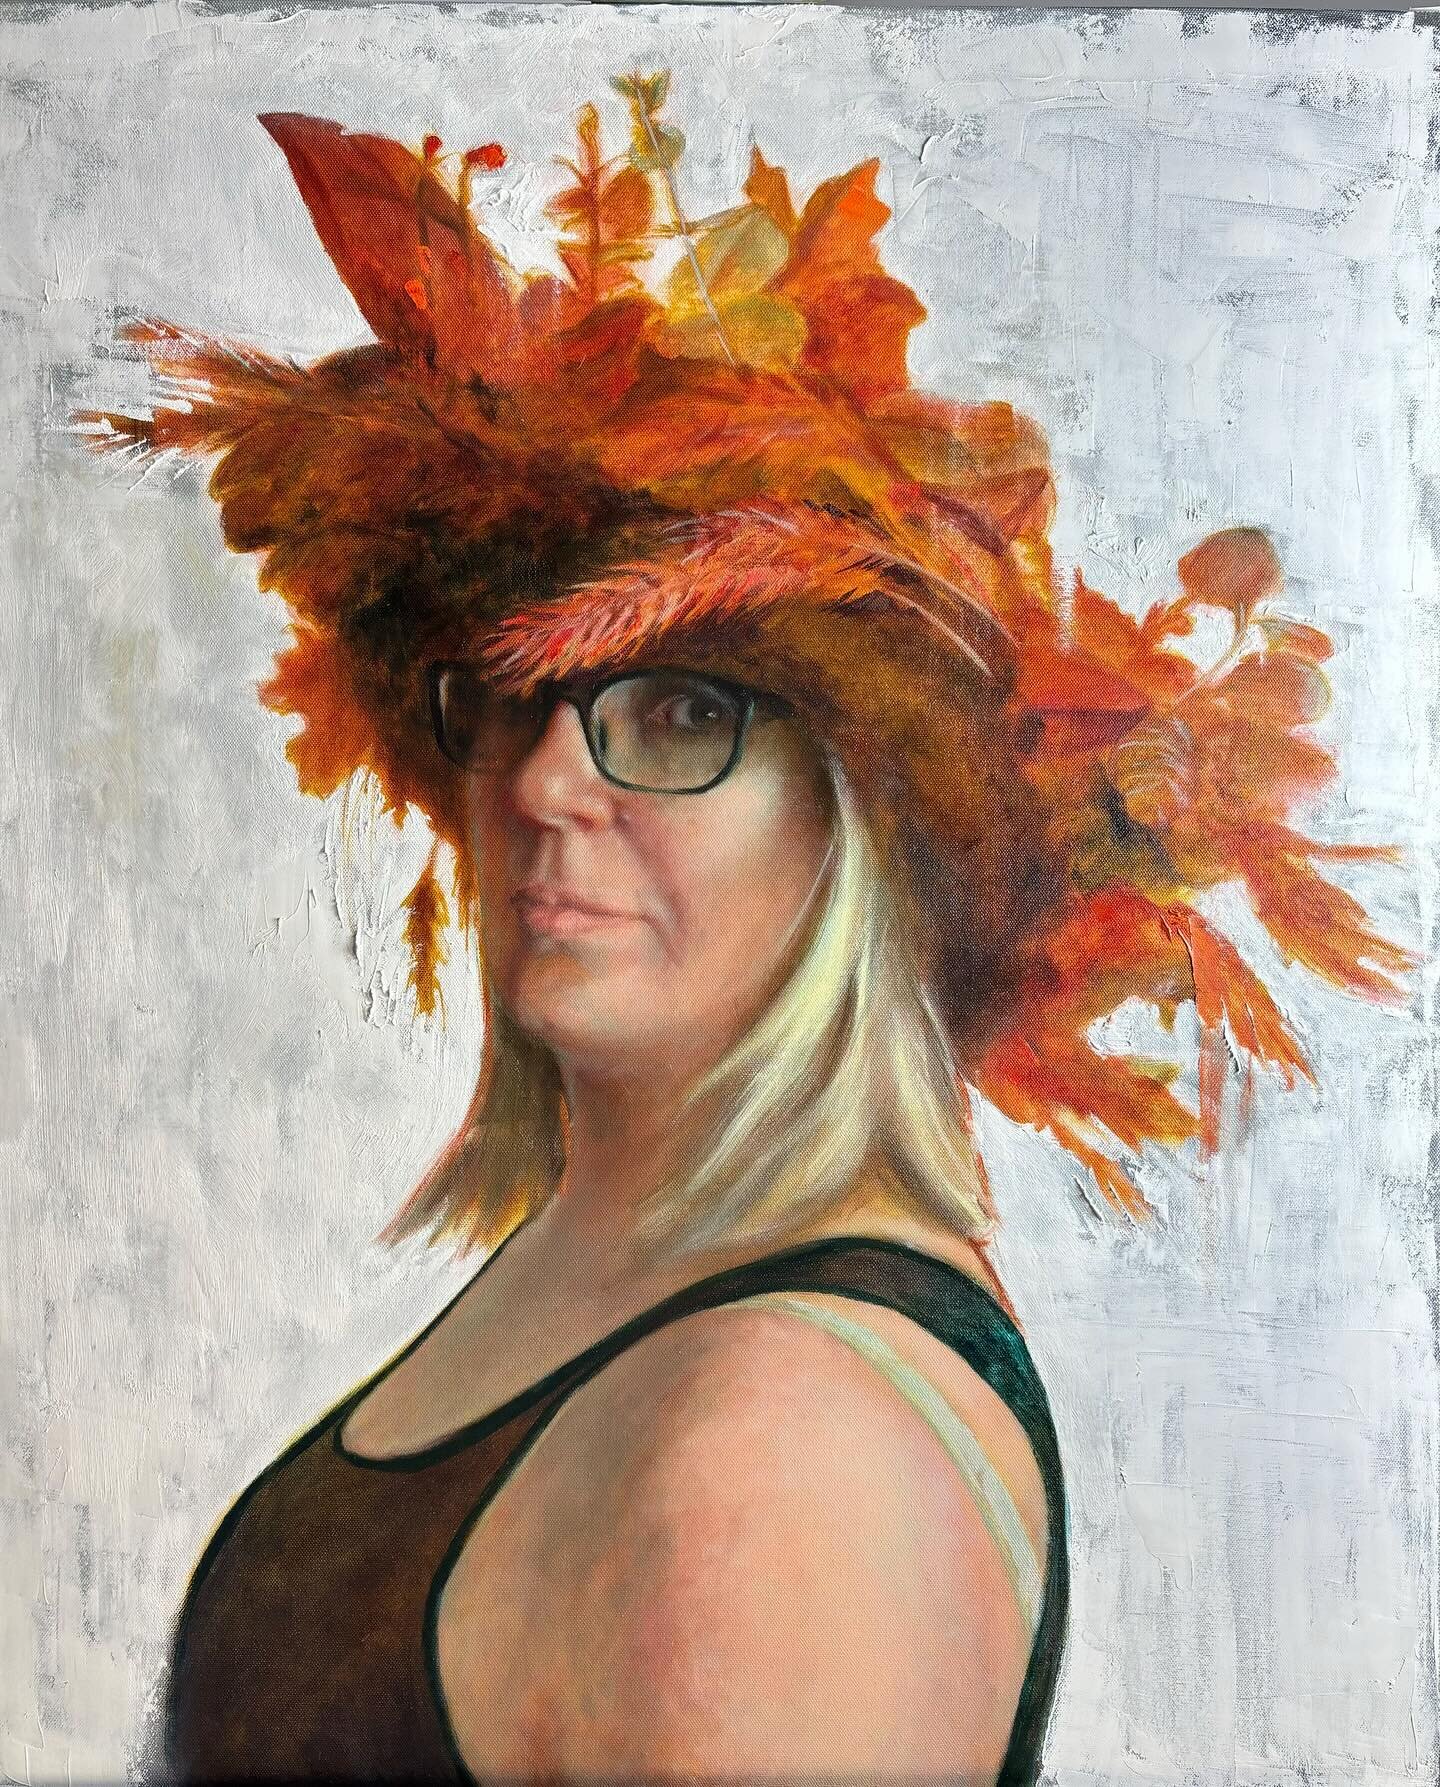 This one is called &lsquo;The Impostor&rsquo; - a #self-portrait.  New year, new start. After a two year break from painting, two house moves and multiple school and studio moves, I am finally back at the easel.  #firstpaintinginyears #impostorsyndro